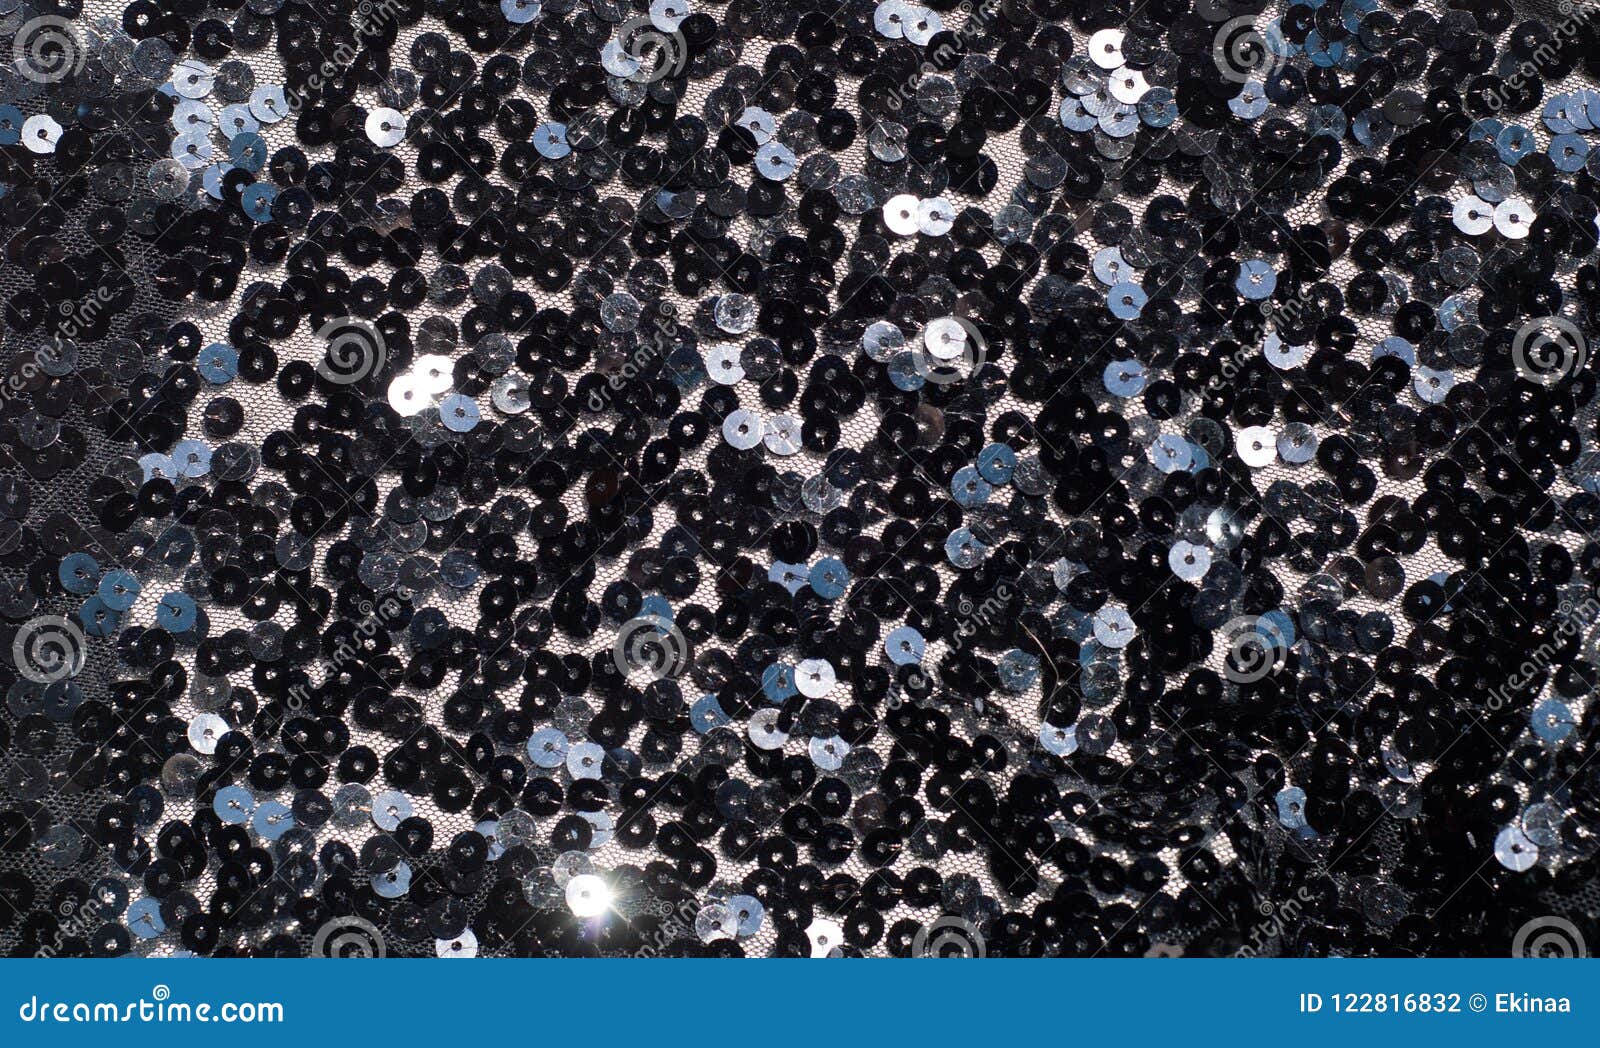 fabric texture, background, black sequined